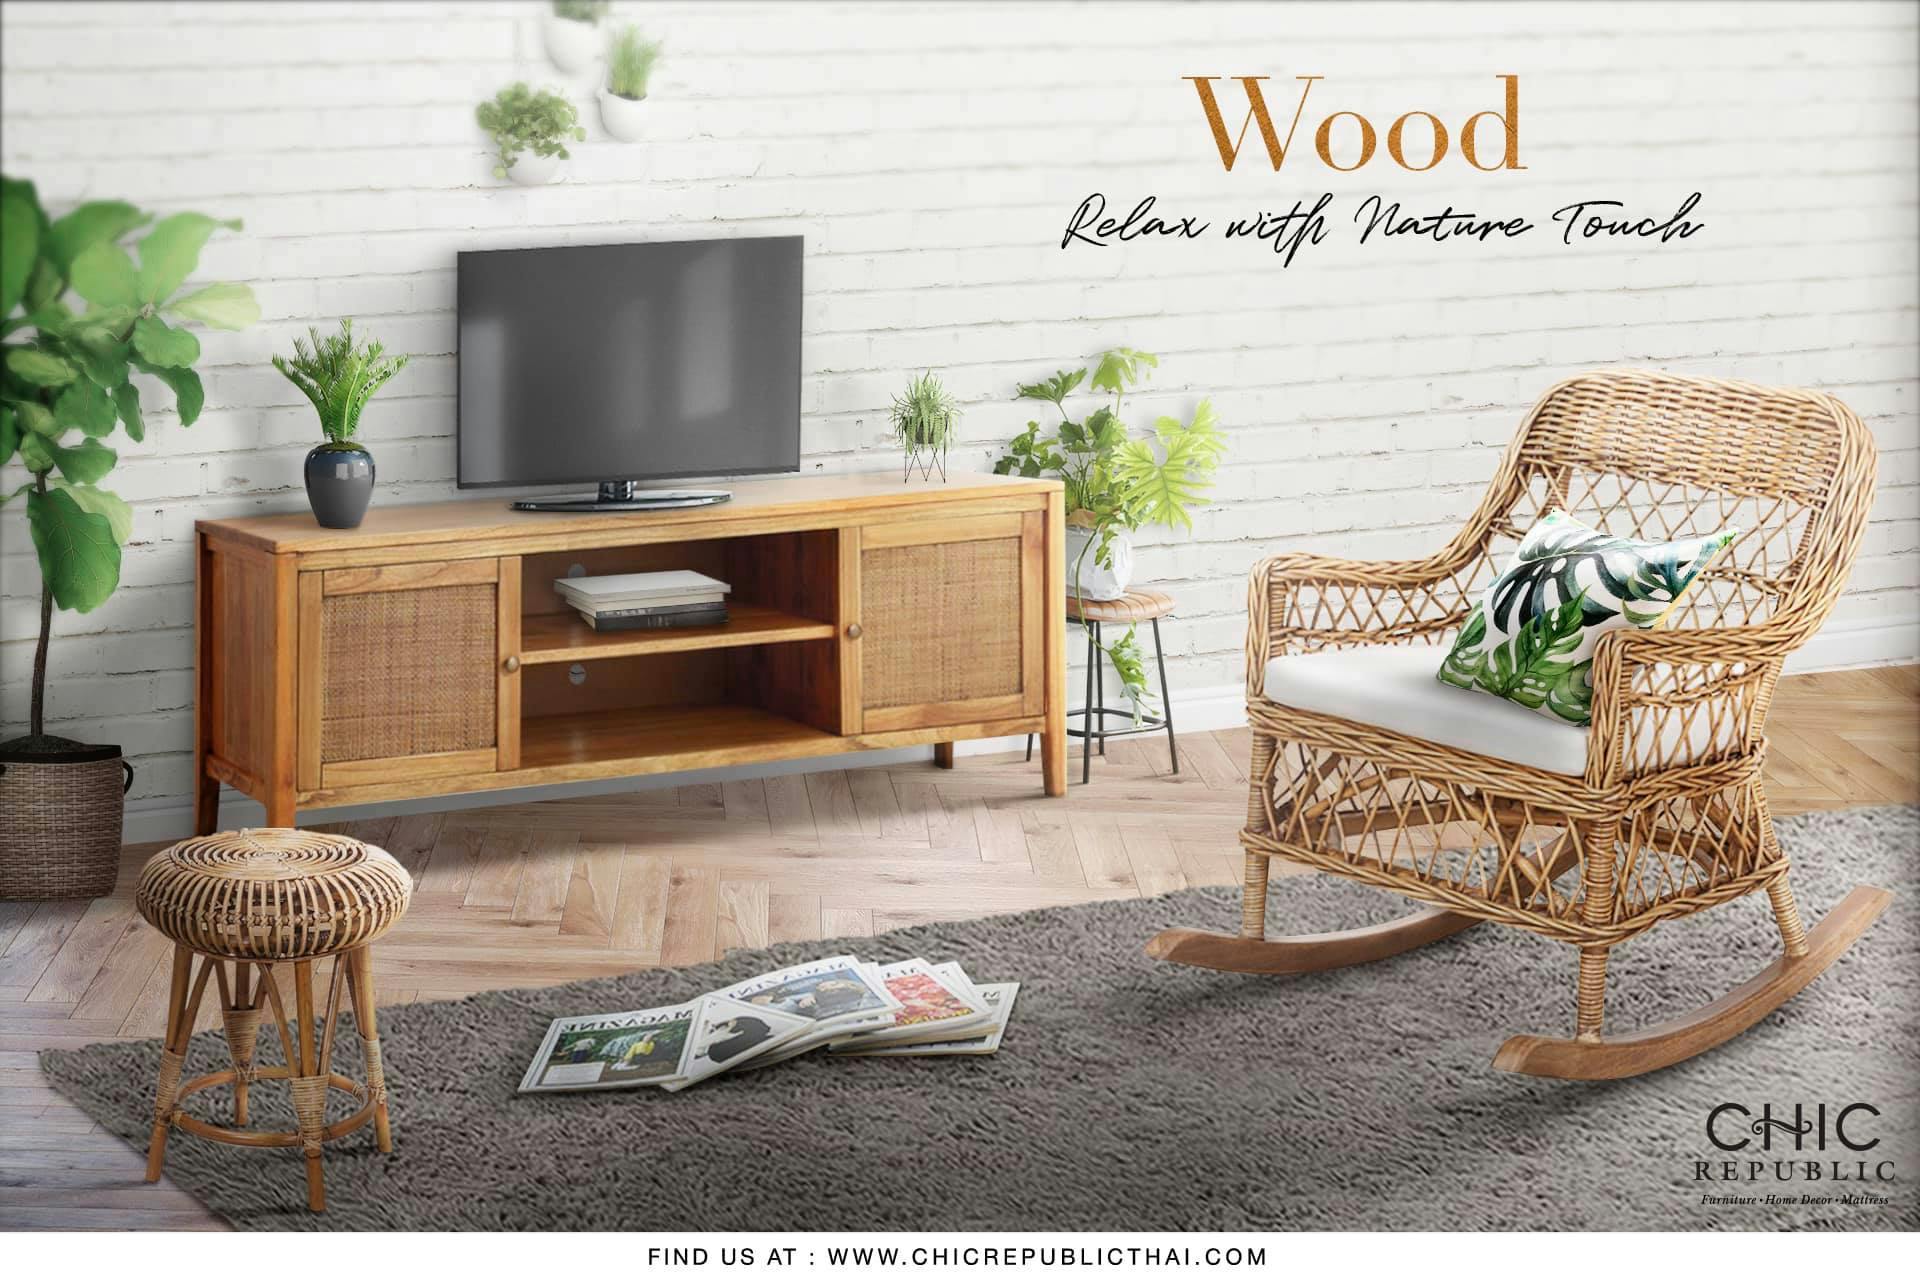 How to take care of wooden furniture•Steel•Leather•Fabric